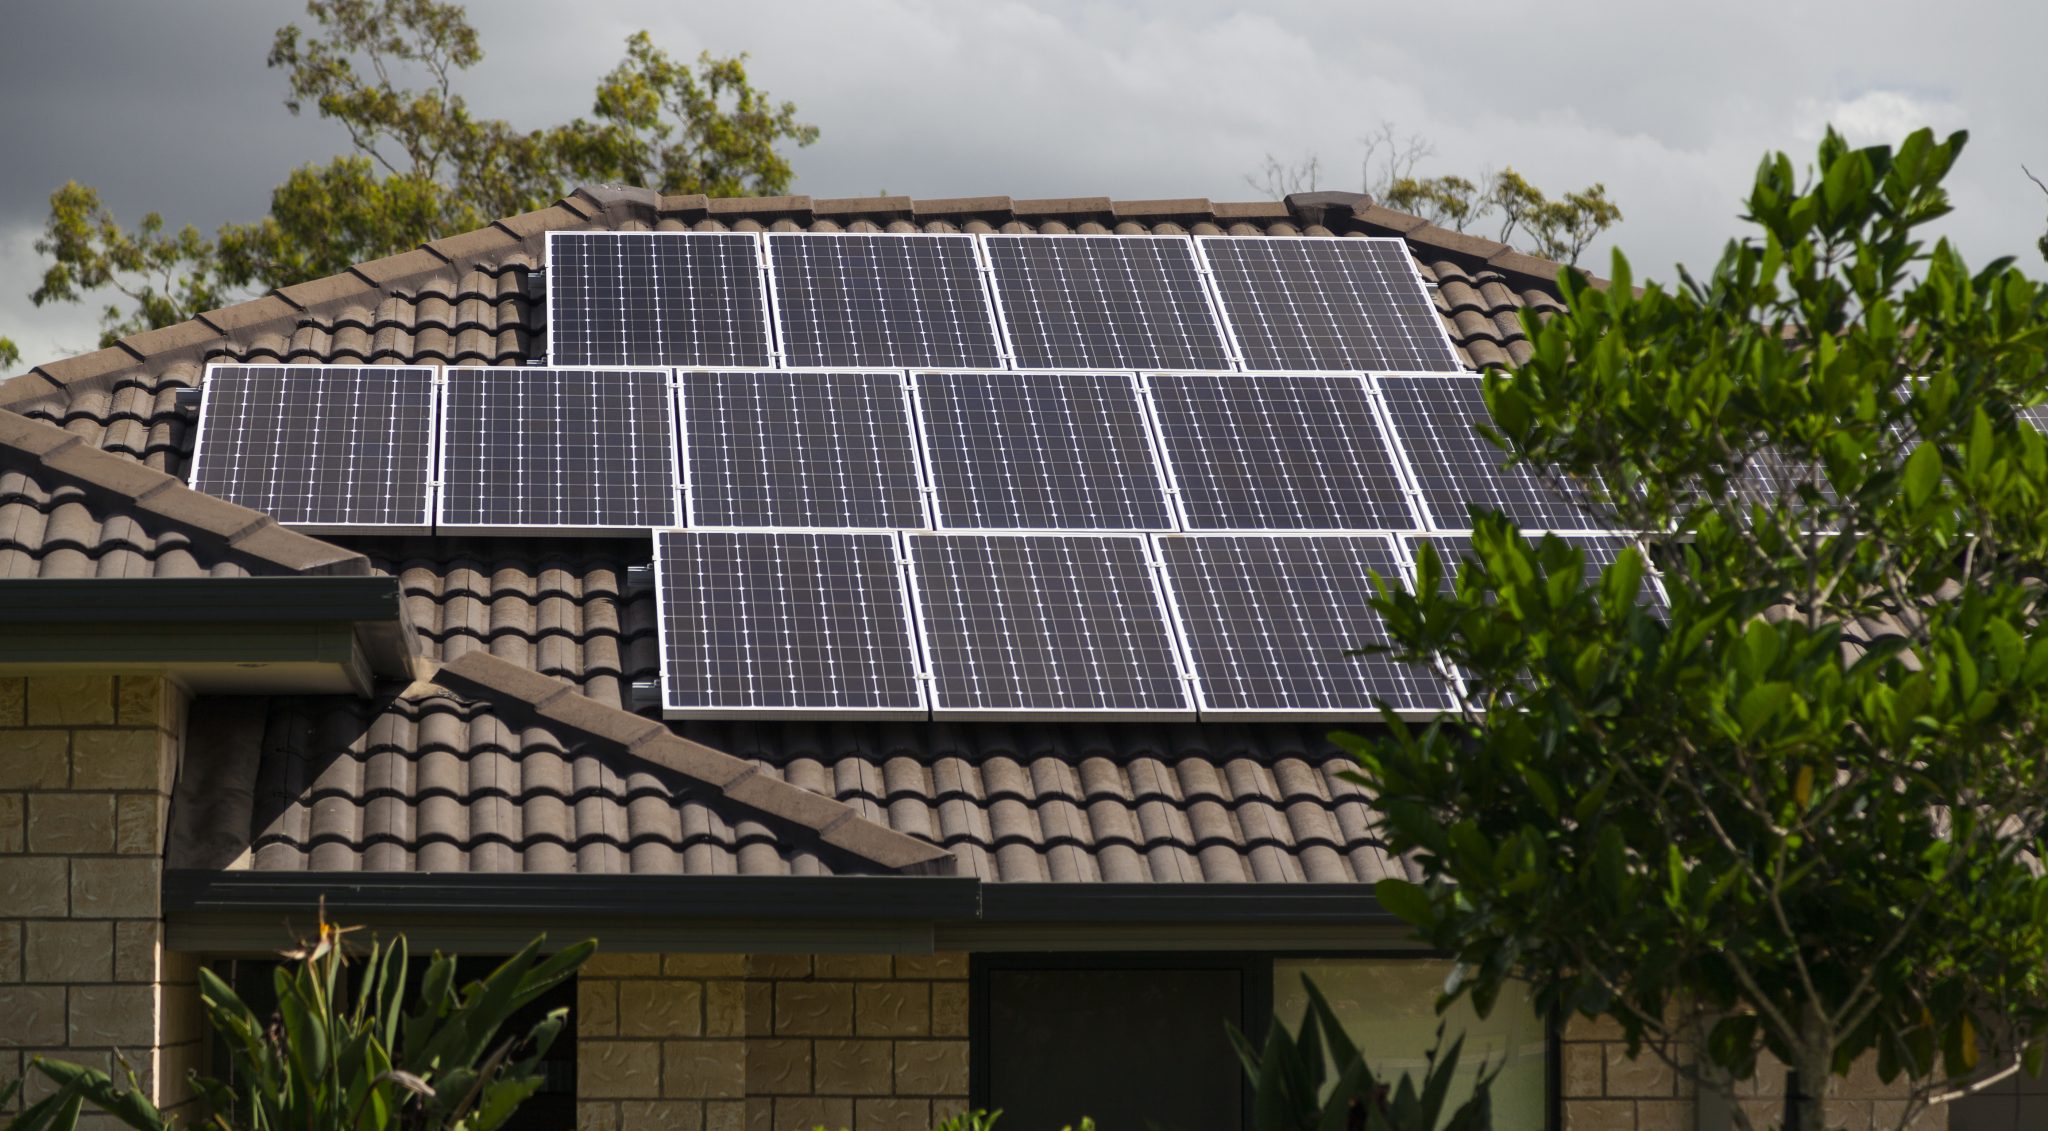 How Much Power Does A 6kW Solar System Produce Per Day?